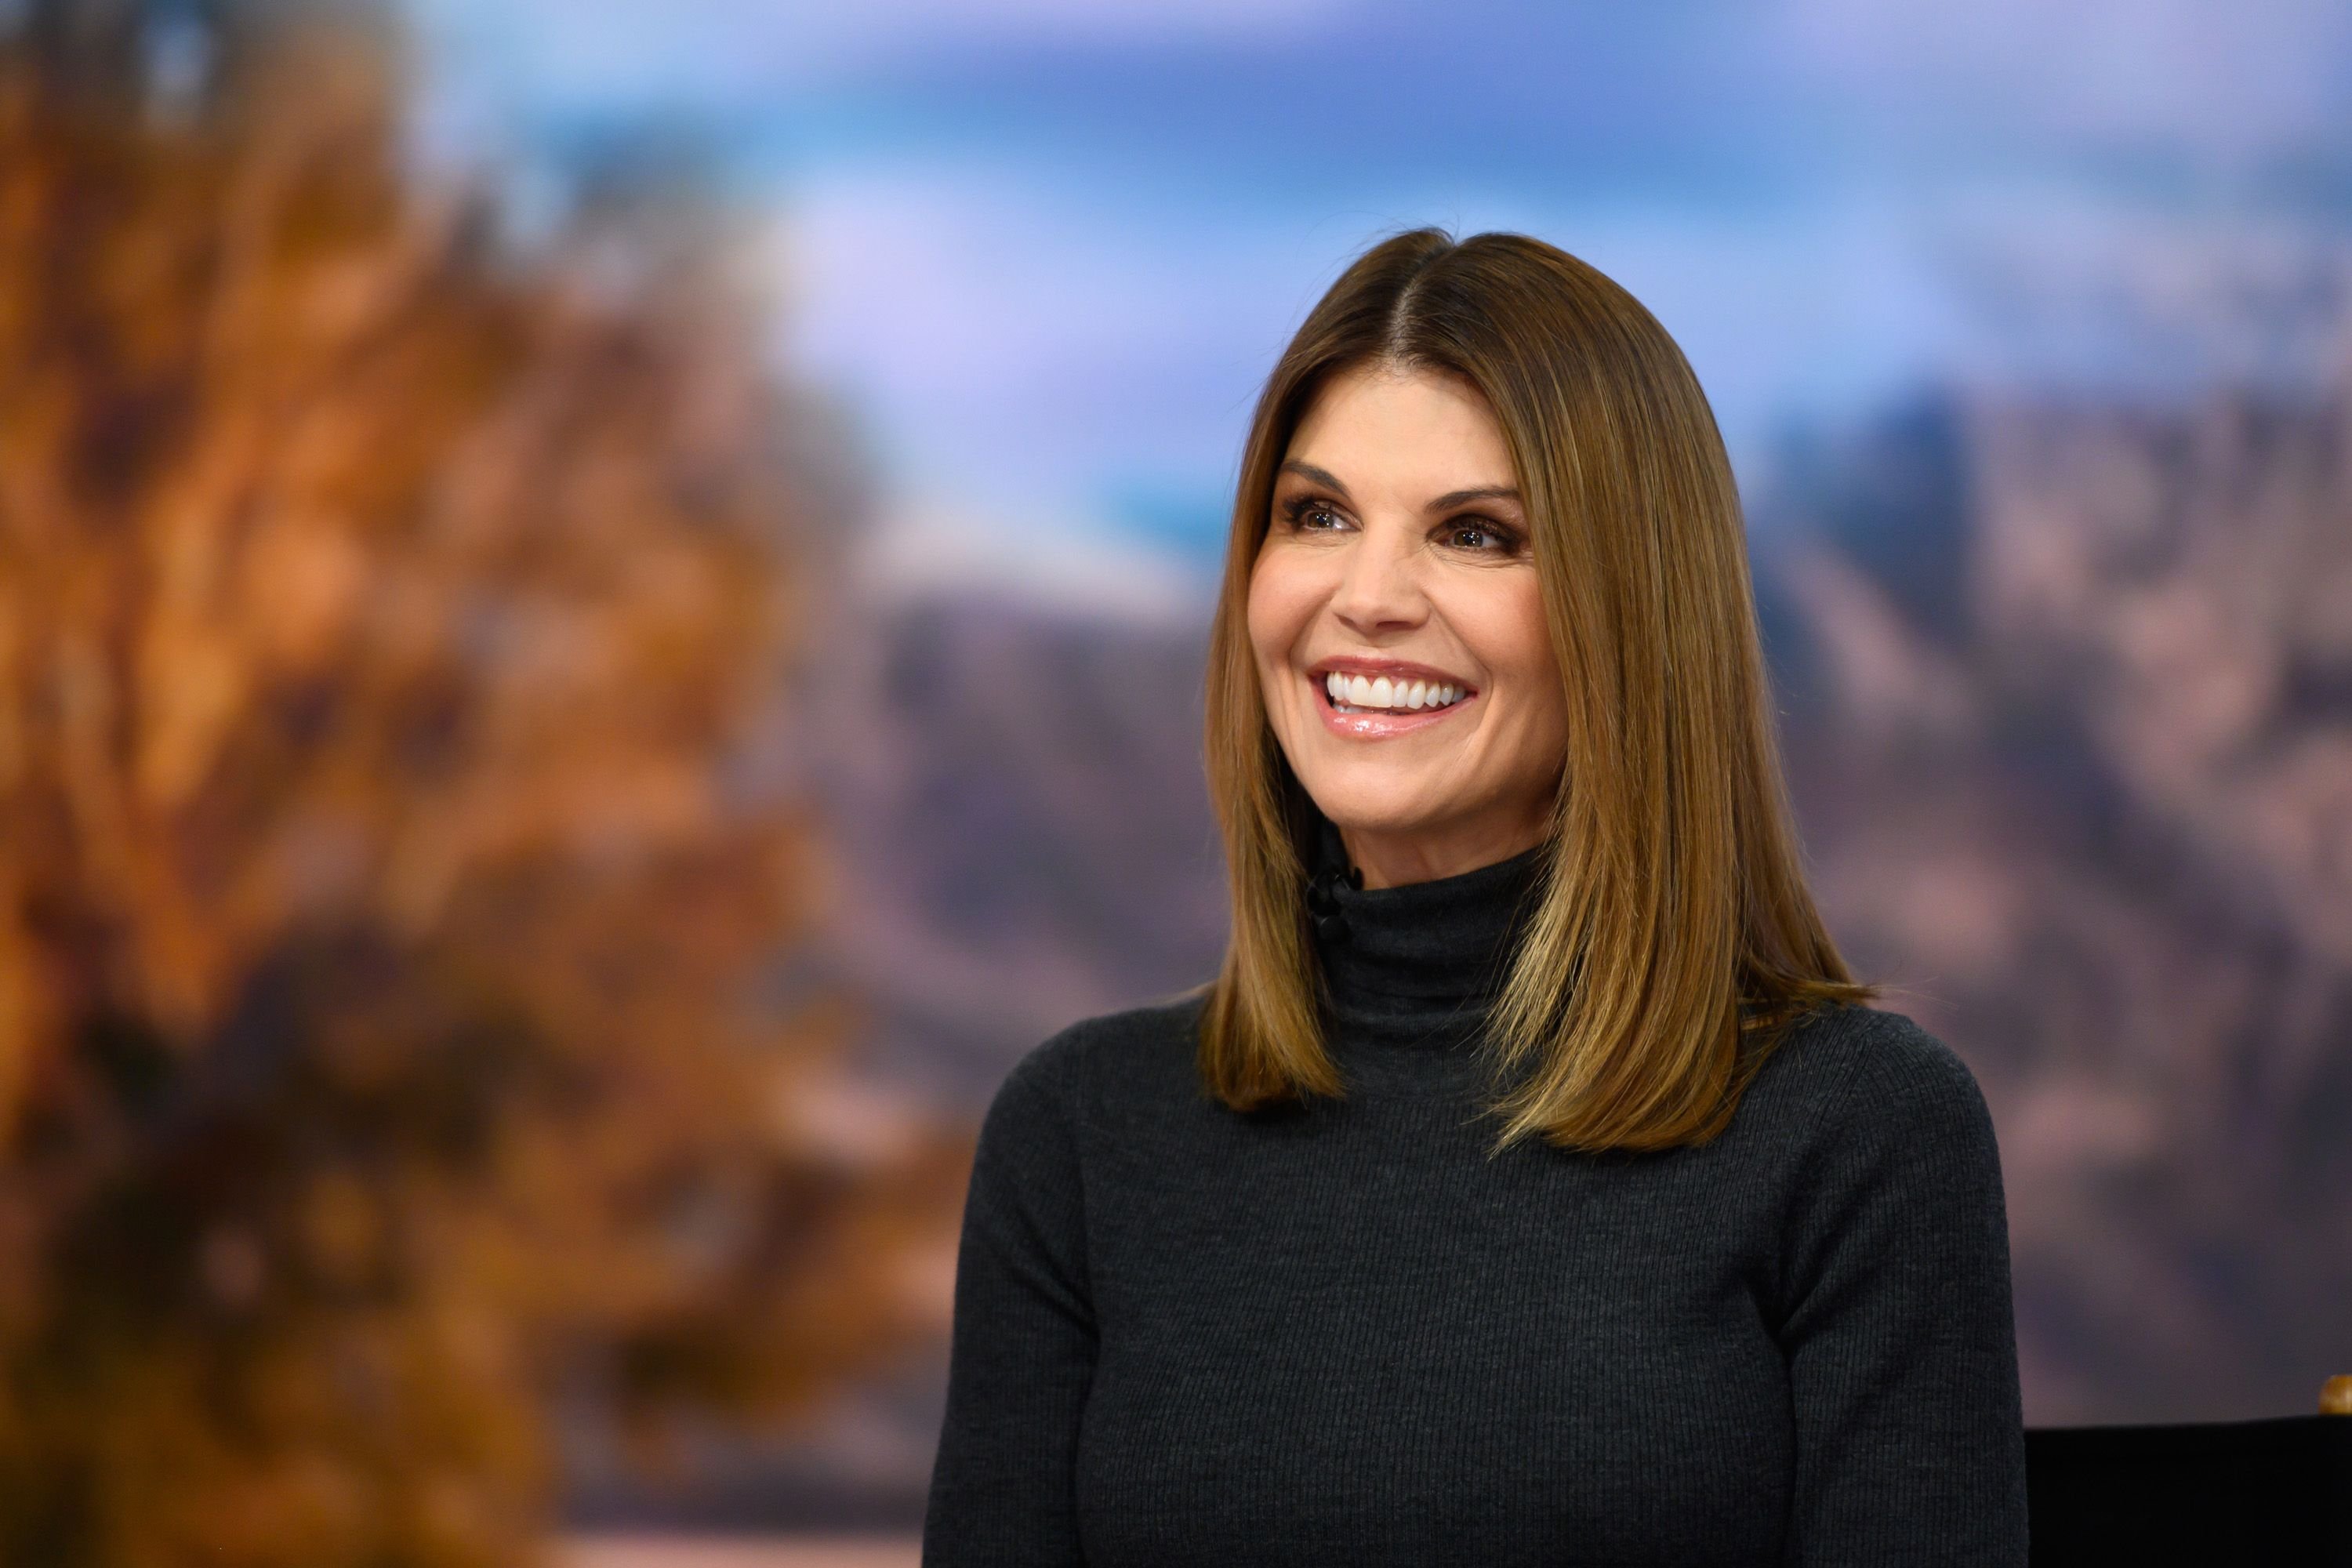 Lori Loughlin at Today - Season 68 on Thursday, February 14, 2019 | Photo: Getty Images